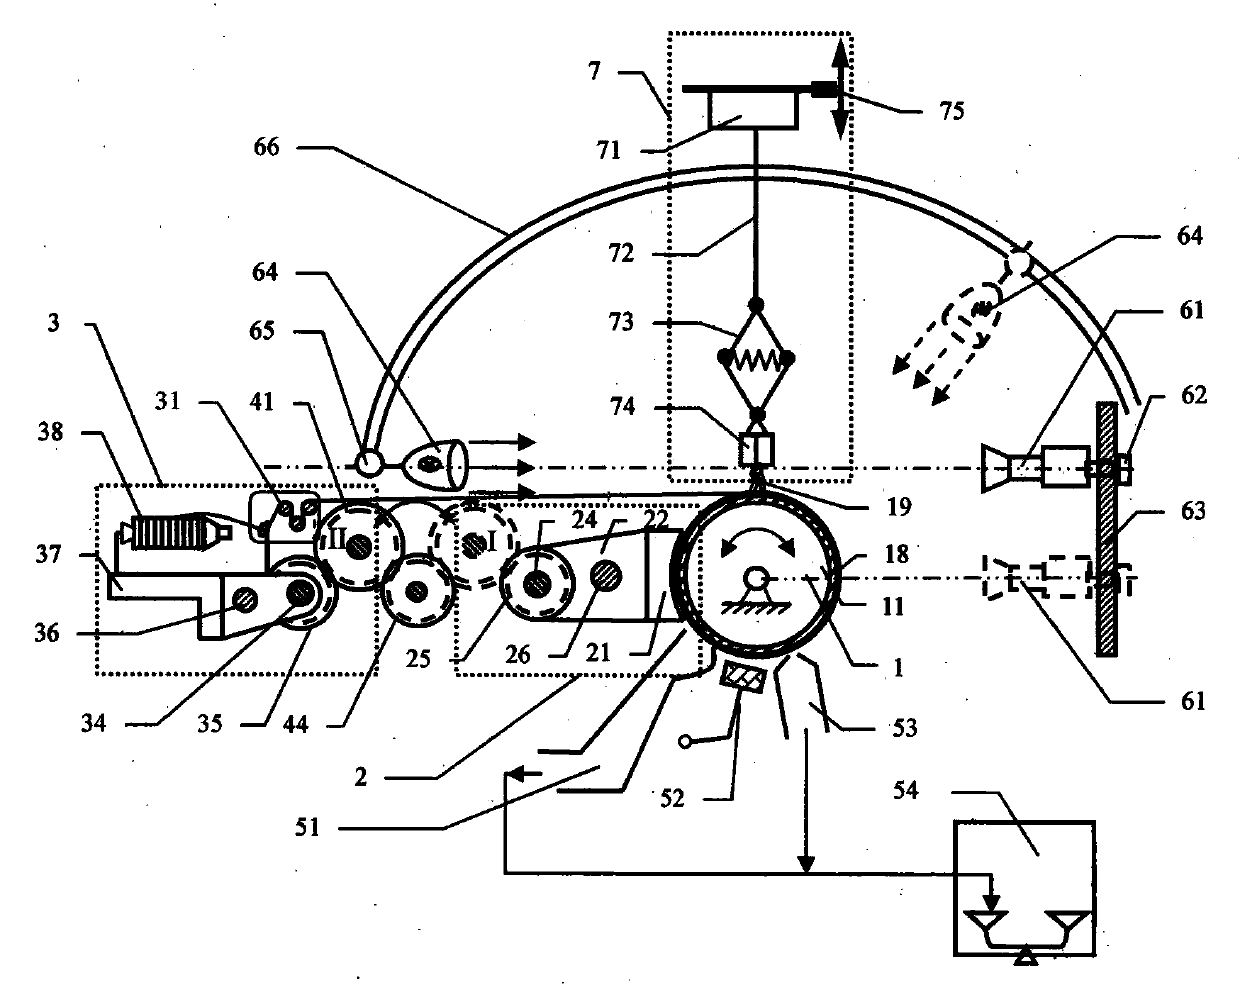 Device and method used for measuring pilling form and pulling force of yarns